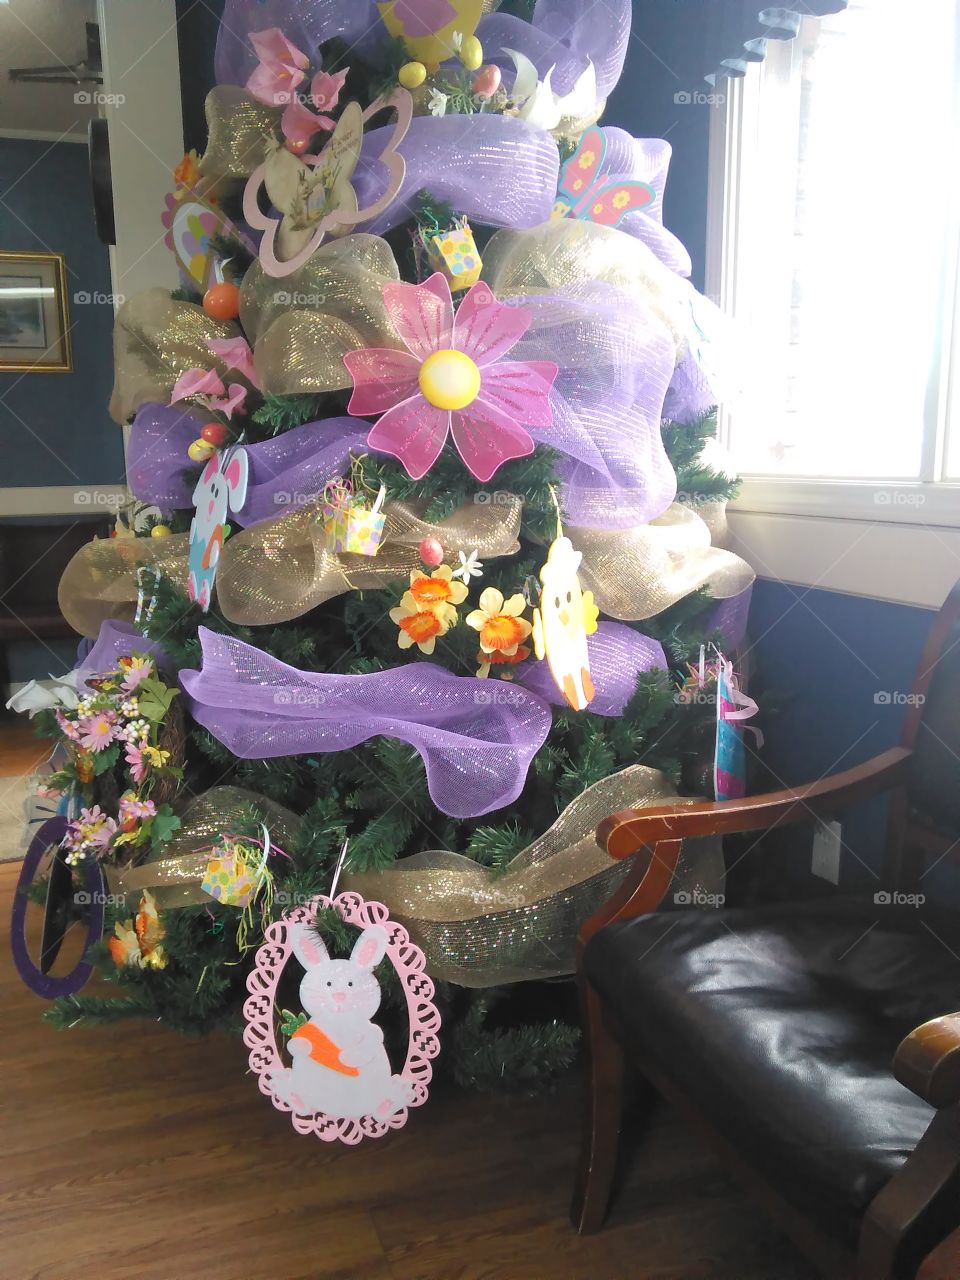 The Easter Tree